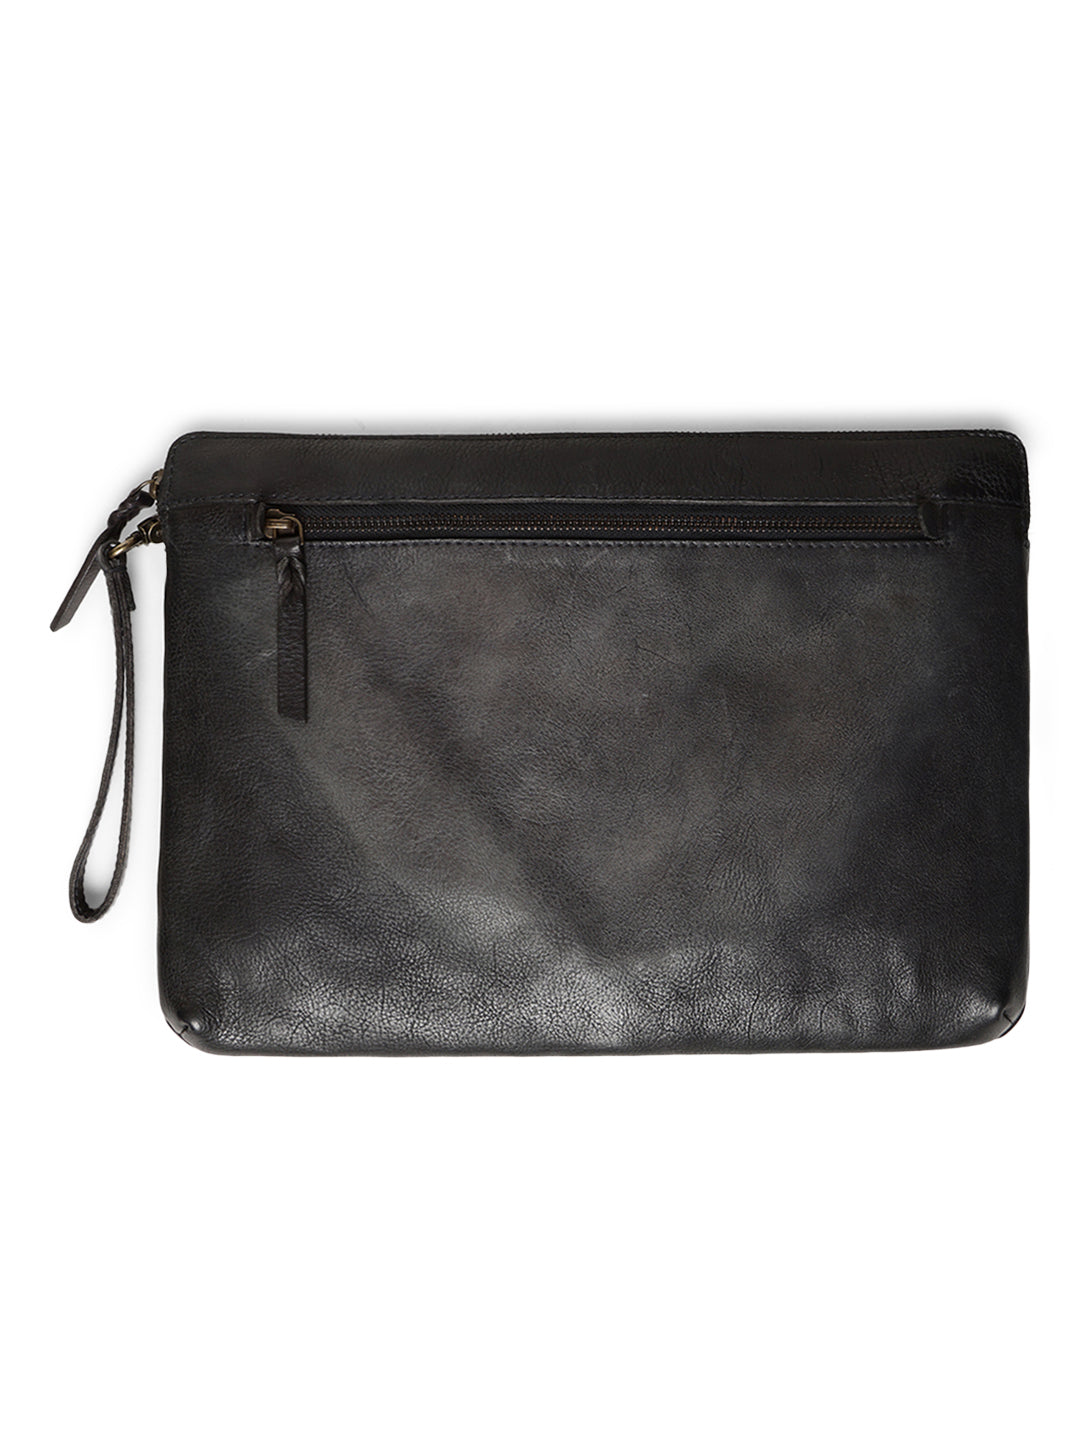 Timeless Protection: Black Leather Laptop Sleeves